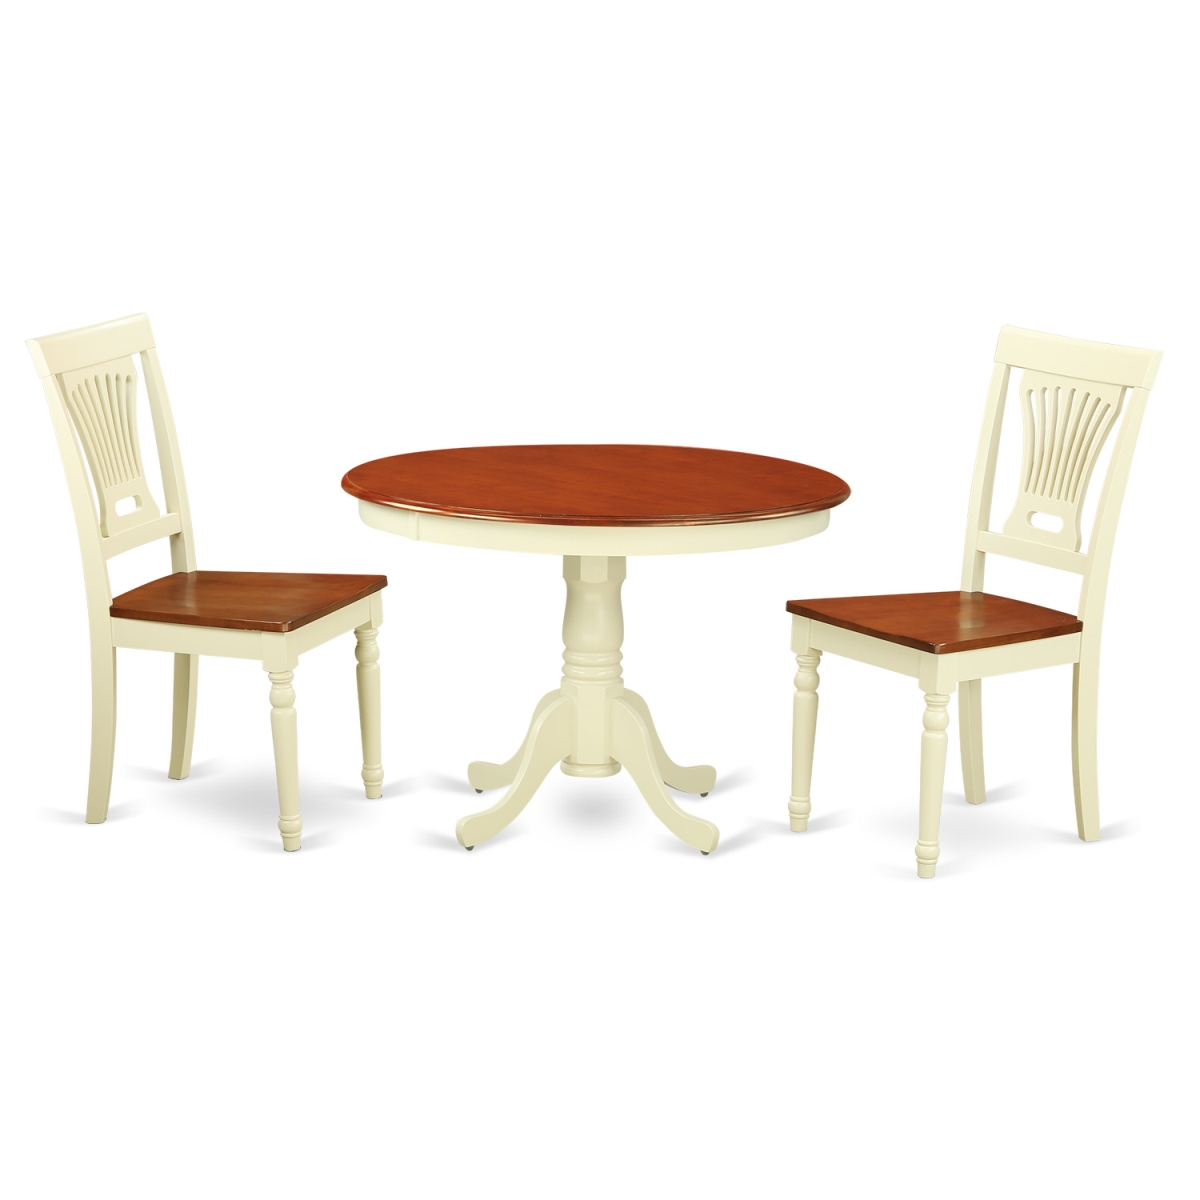 Picture of East West Furniture HLPL3-BMK-W Dining Set - One Round Table & Two Chairs Wood Seat&#44; Buttermilk & Cherry - 42 in. - 3 Piece